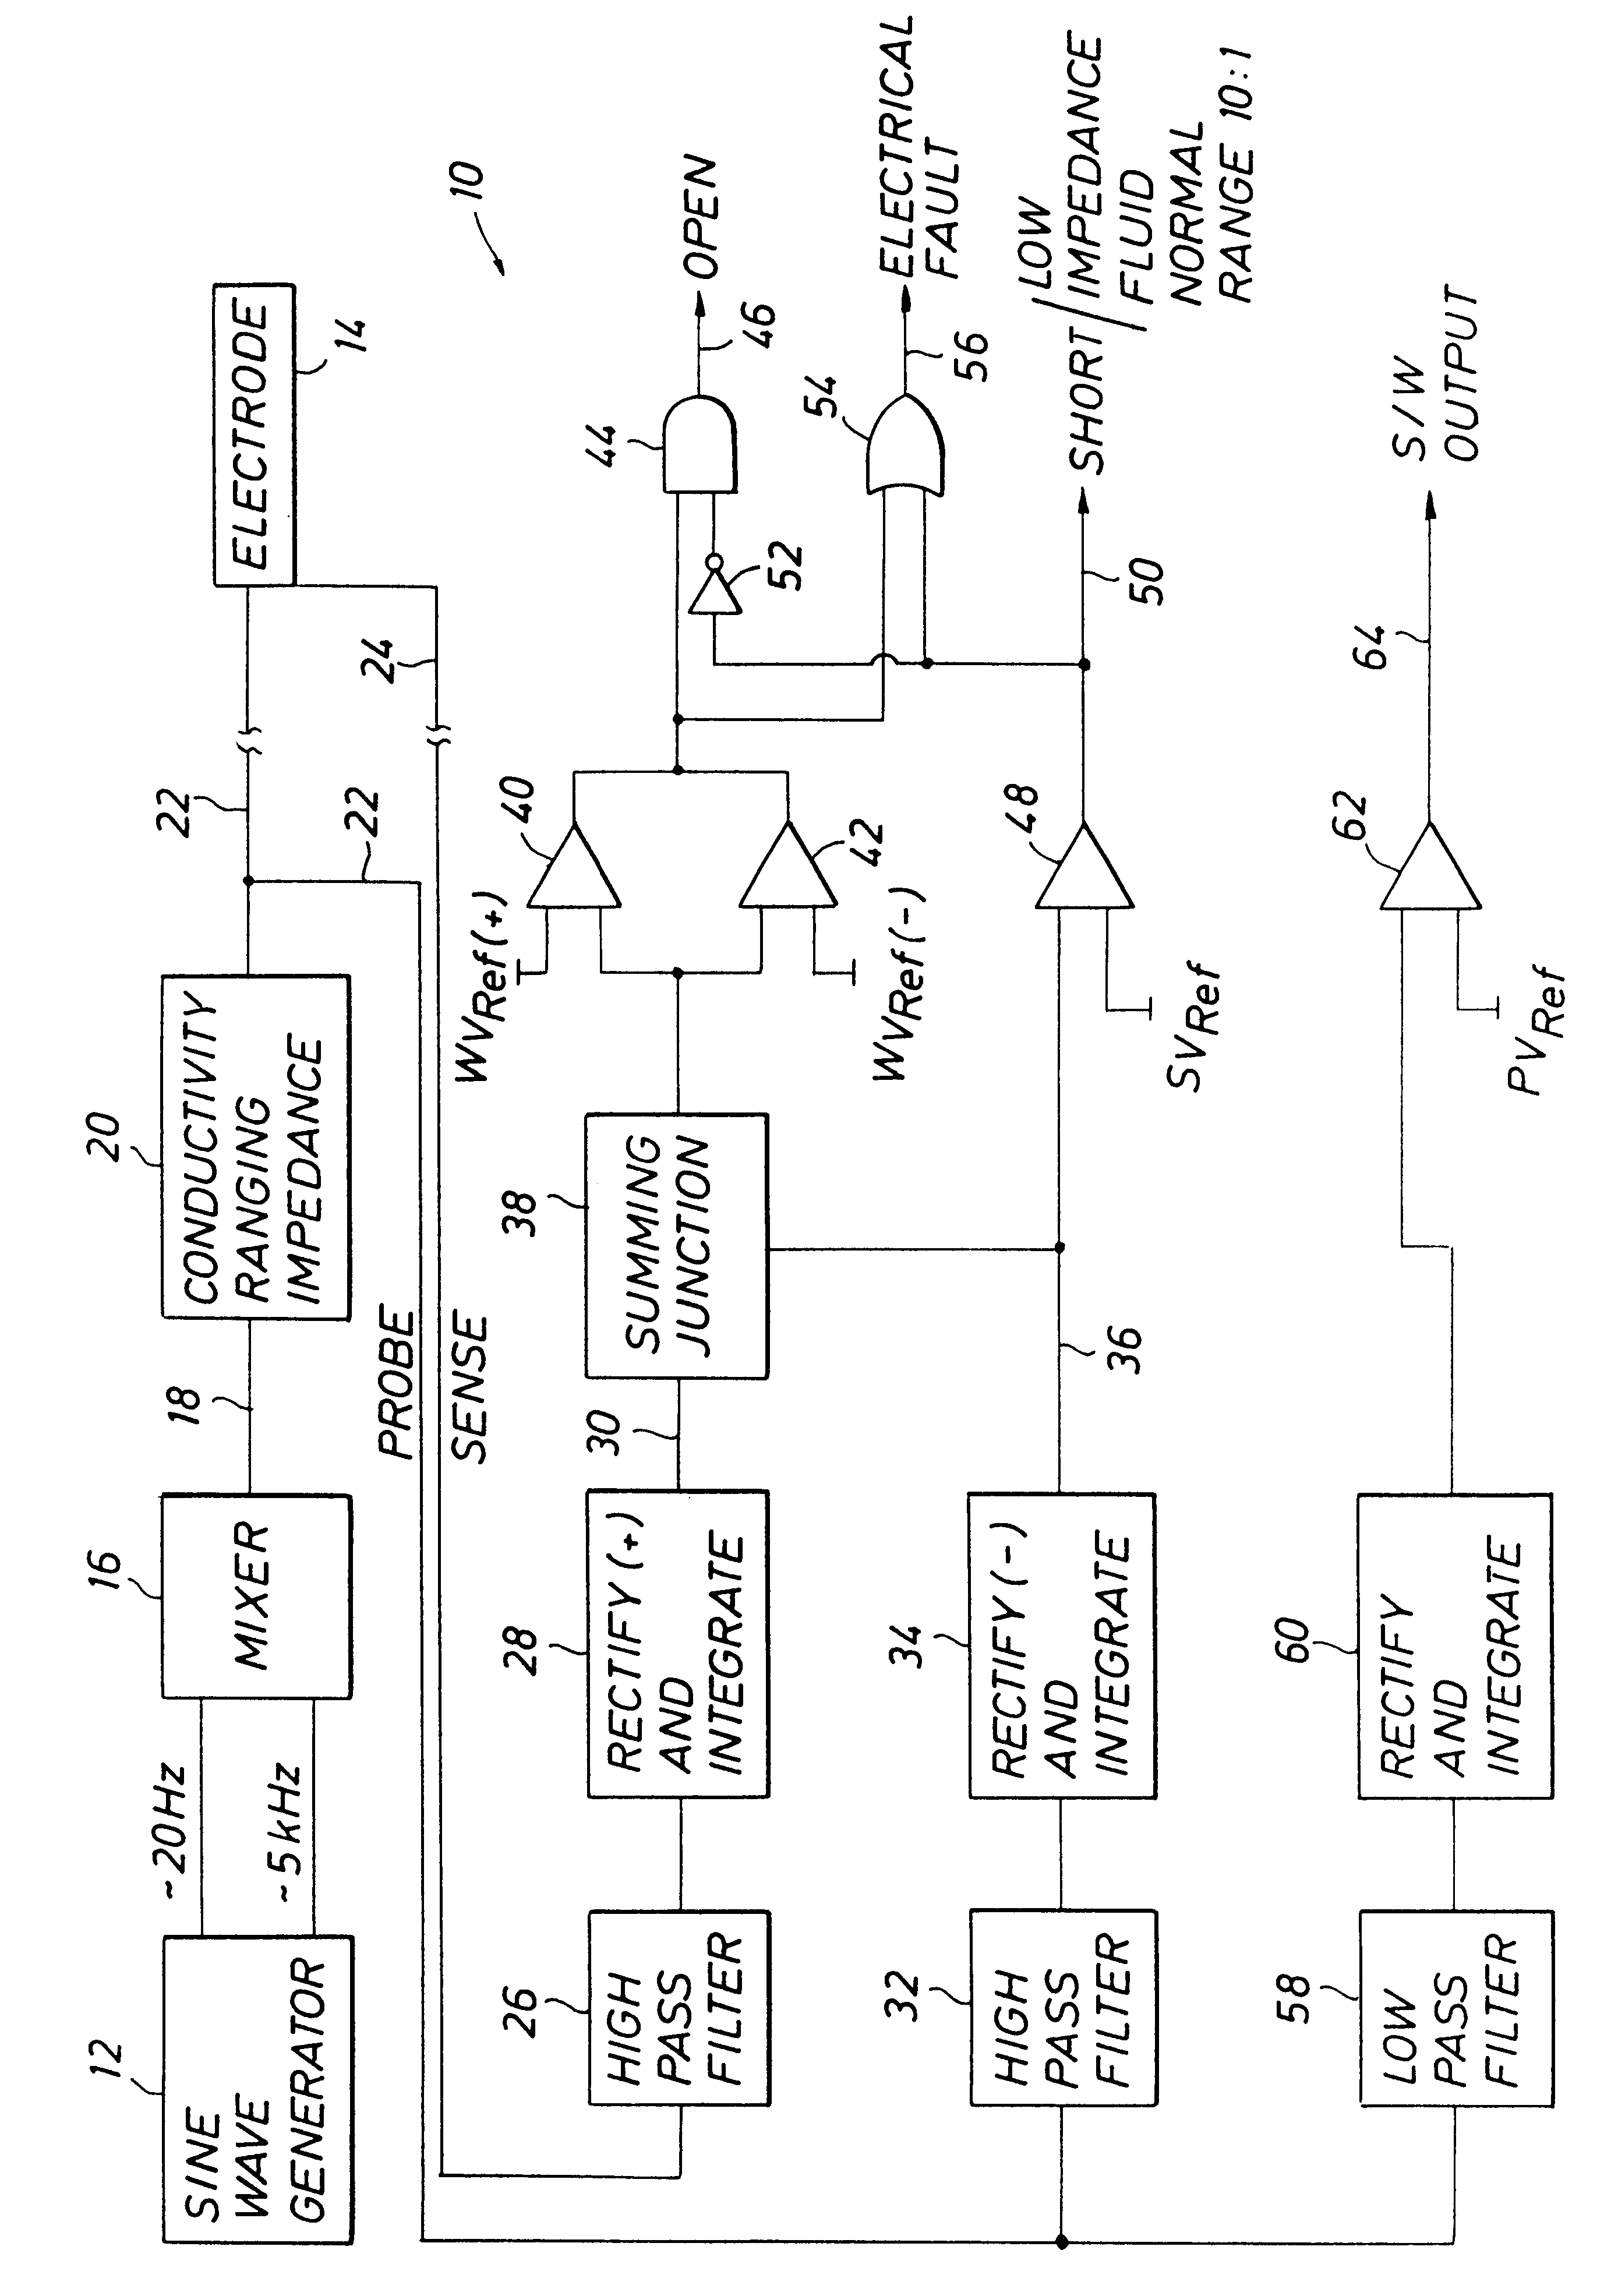 Method and apparatus for circuit fault detection with boiler water level detection system